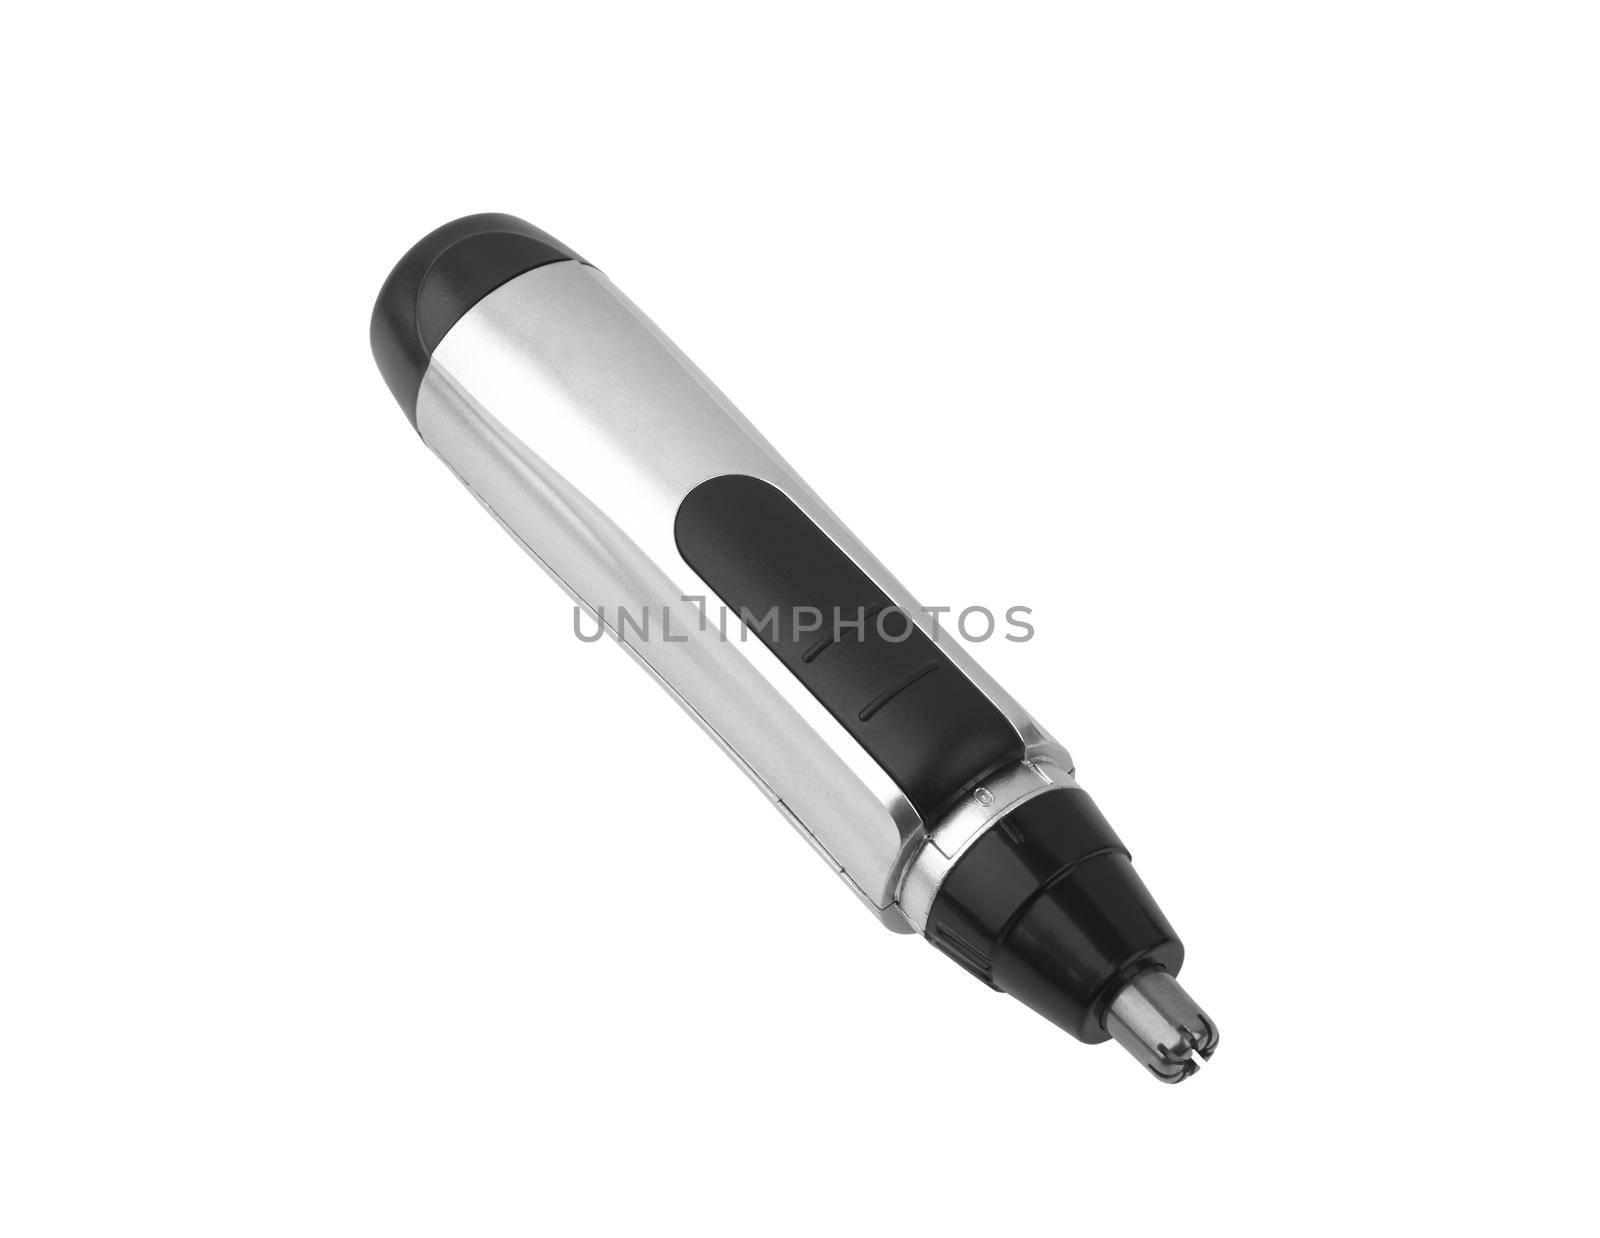 Hair trimmer isolated on a white background